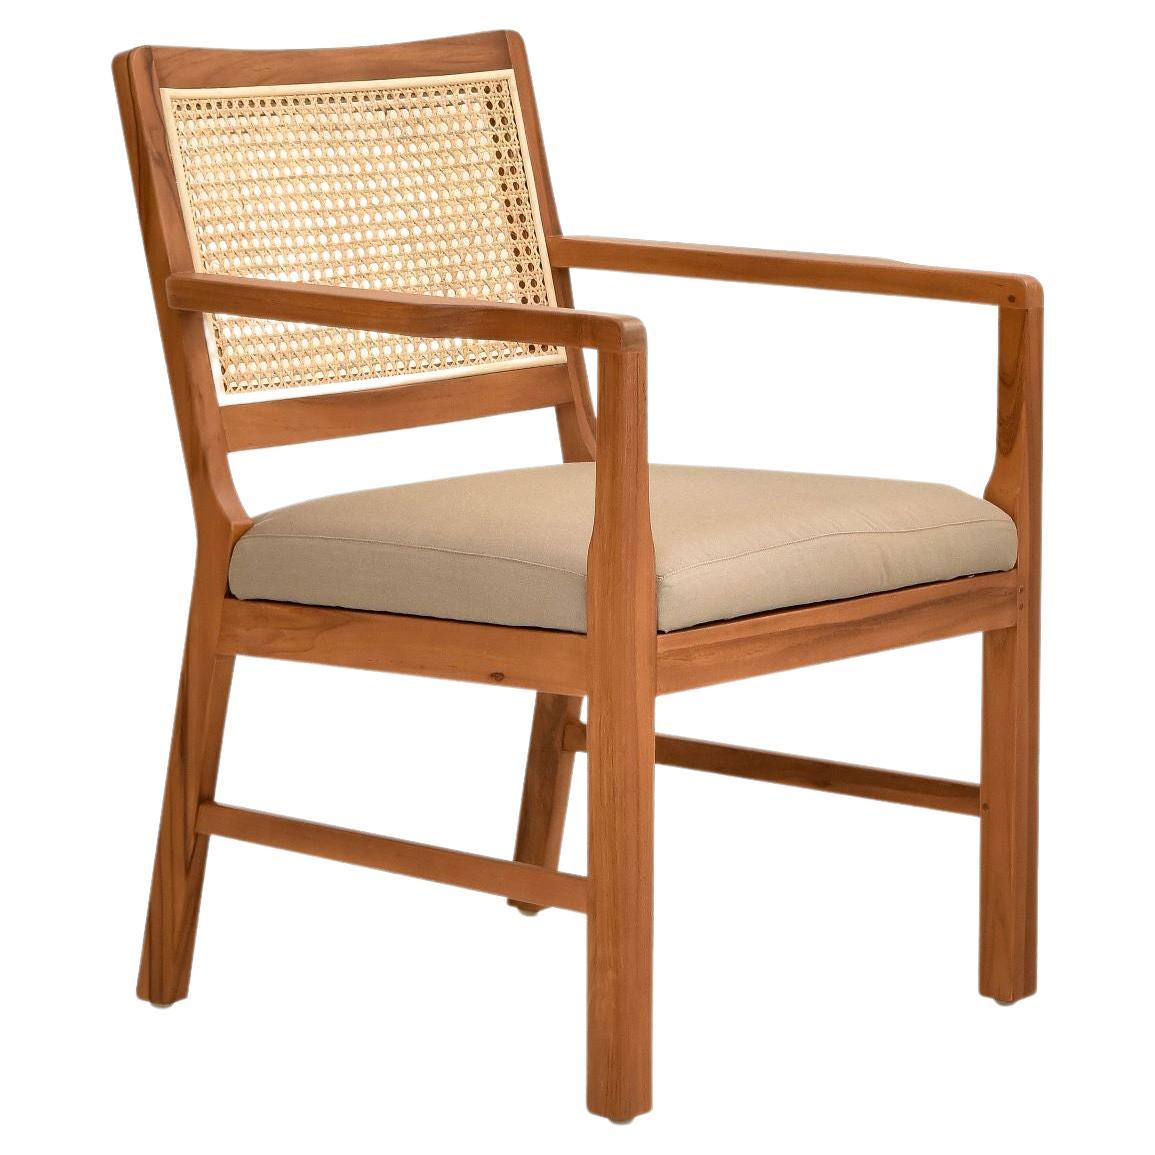 Teak Armchair with Woven Cane Back For Sale